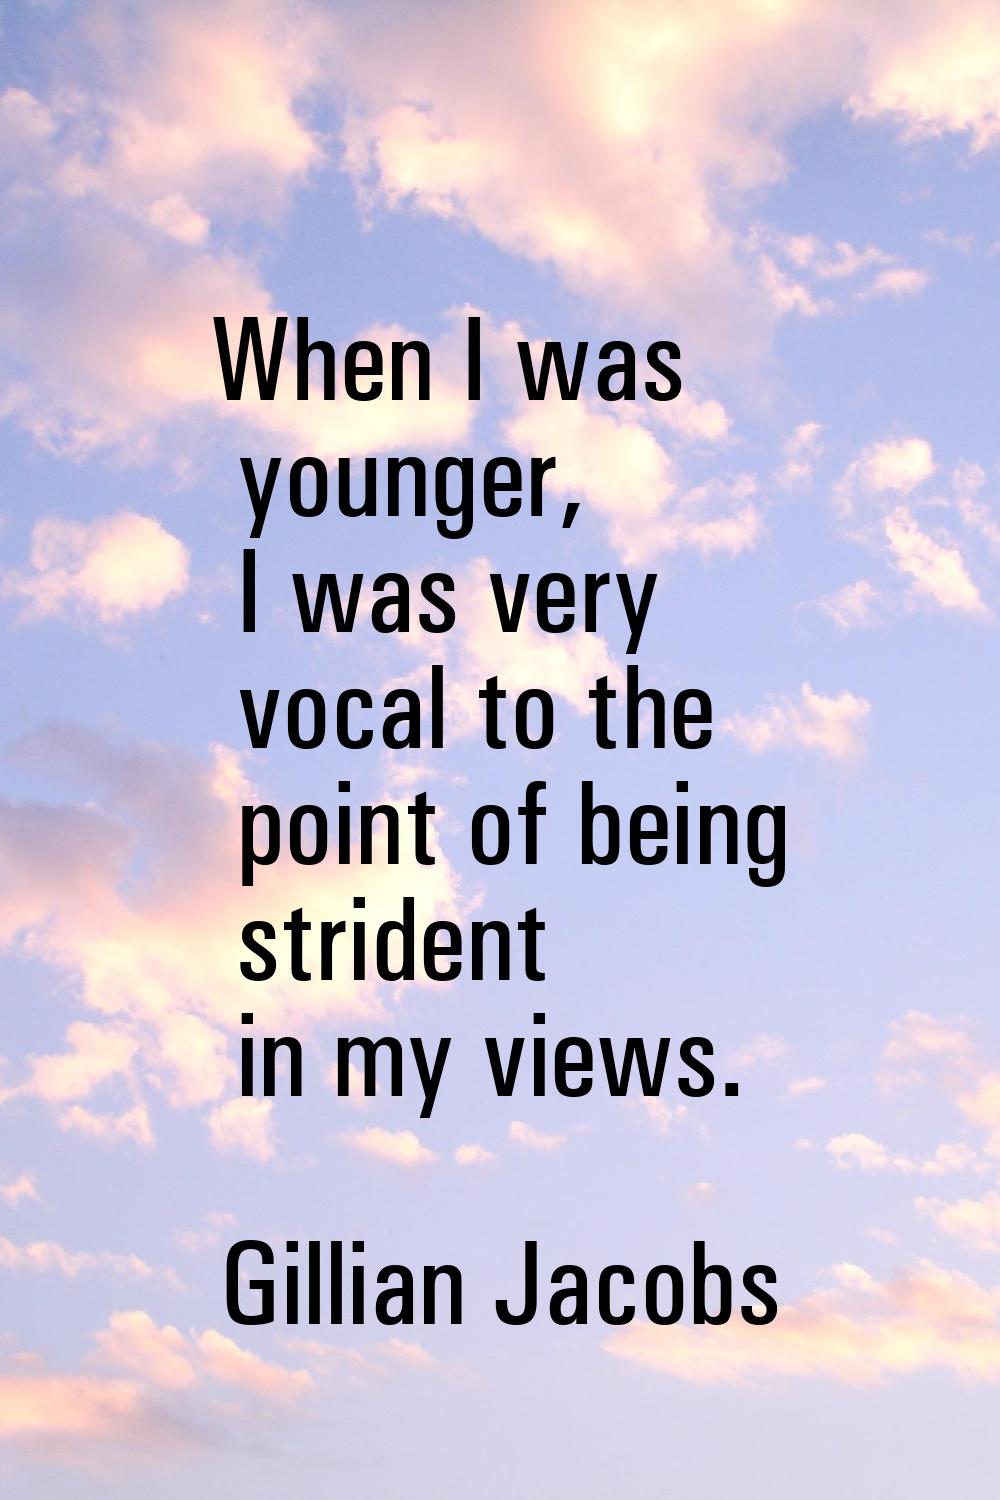 When I was younger, I was very vocal to the point of being strident in my views.